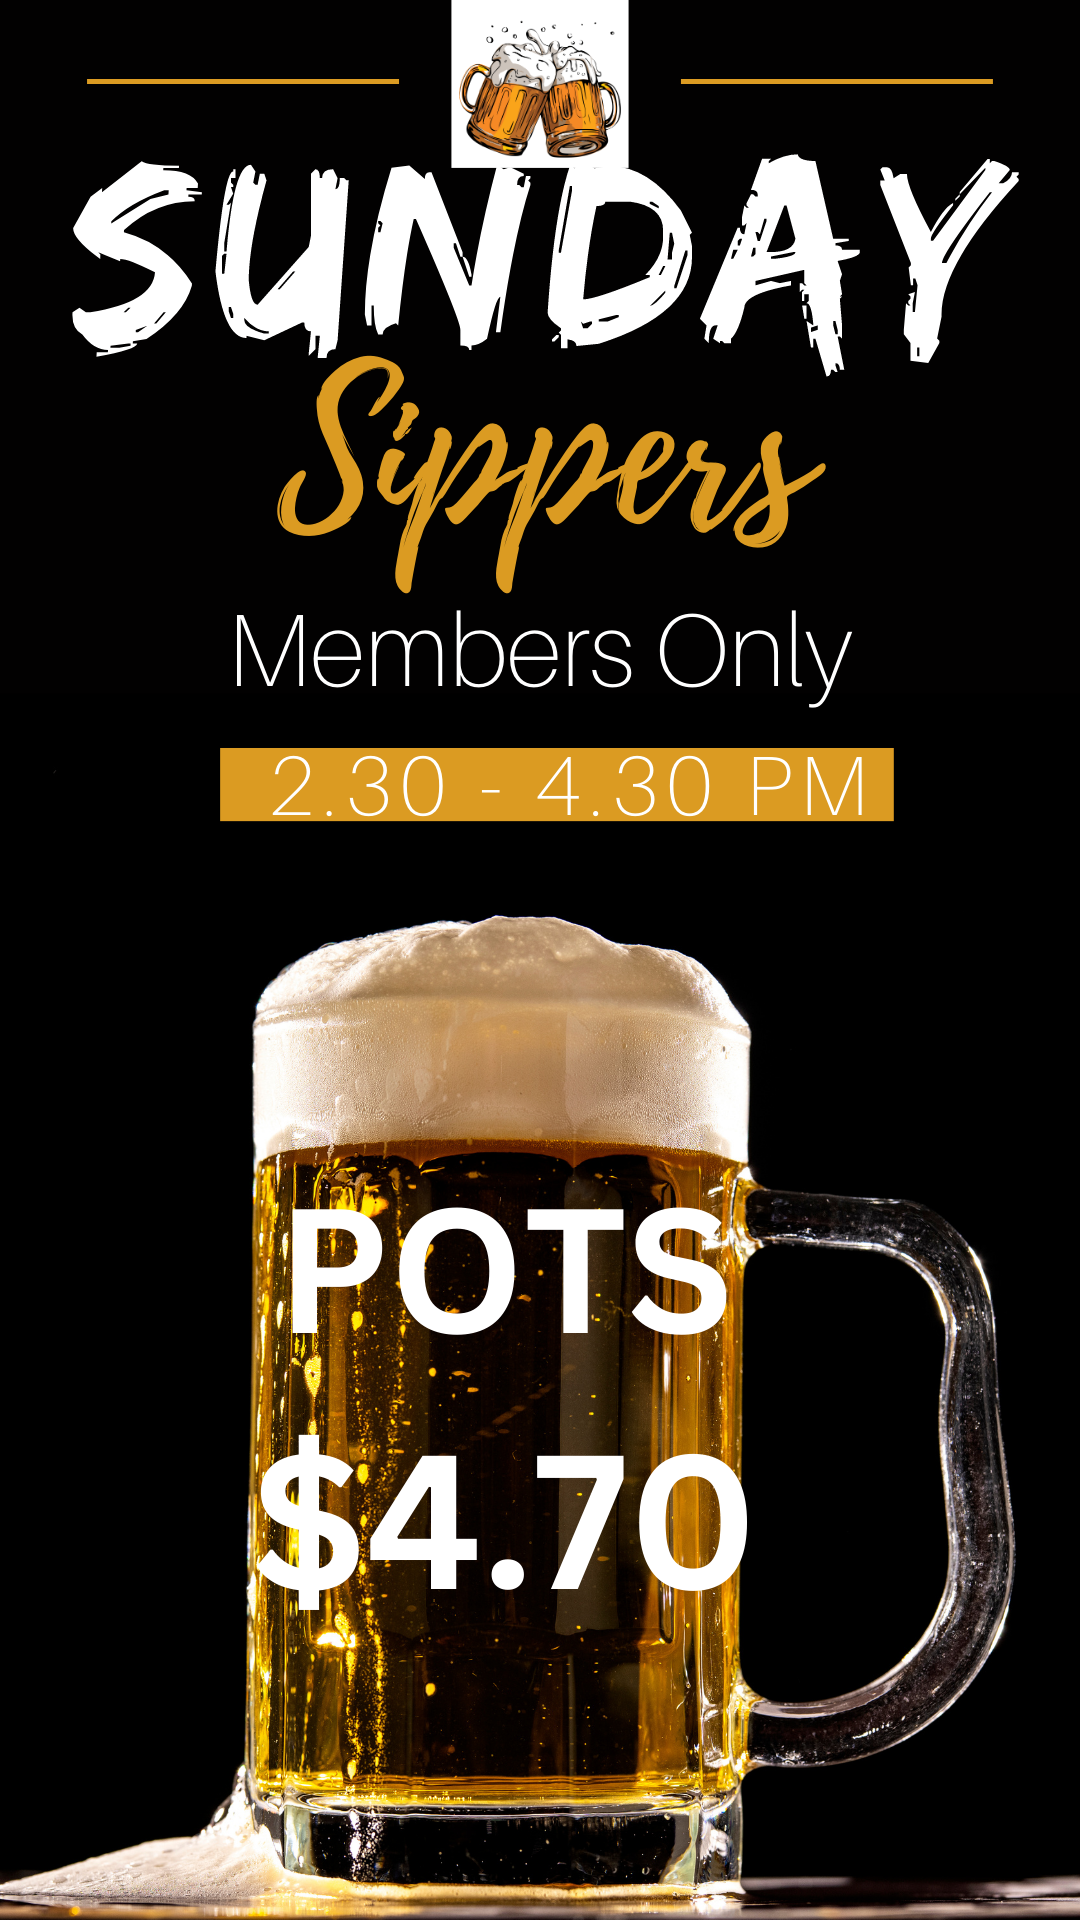 SUNDAY SIPPERS ad image